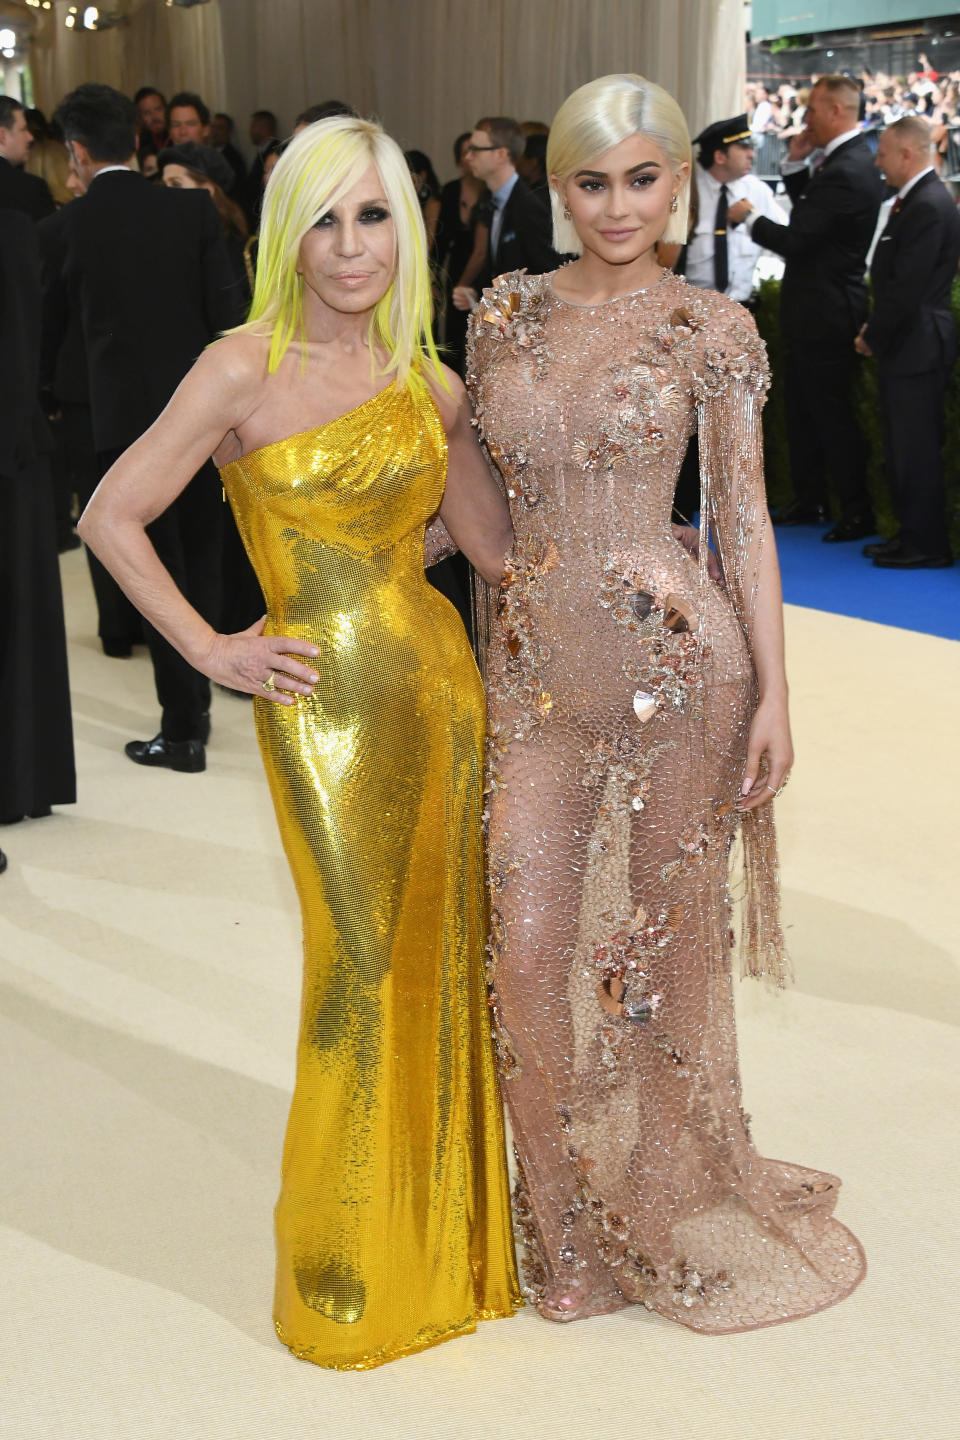 With Kylie Jenner at the Met Gala 2017